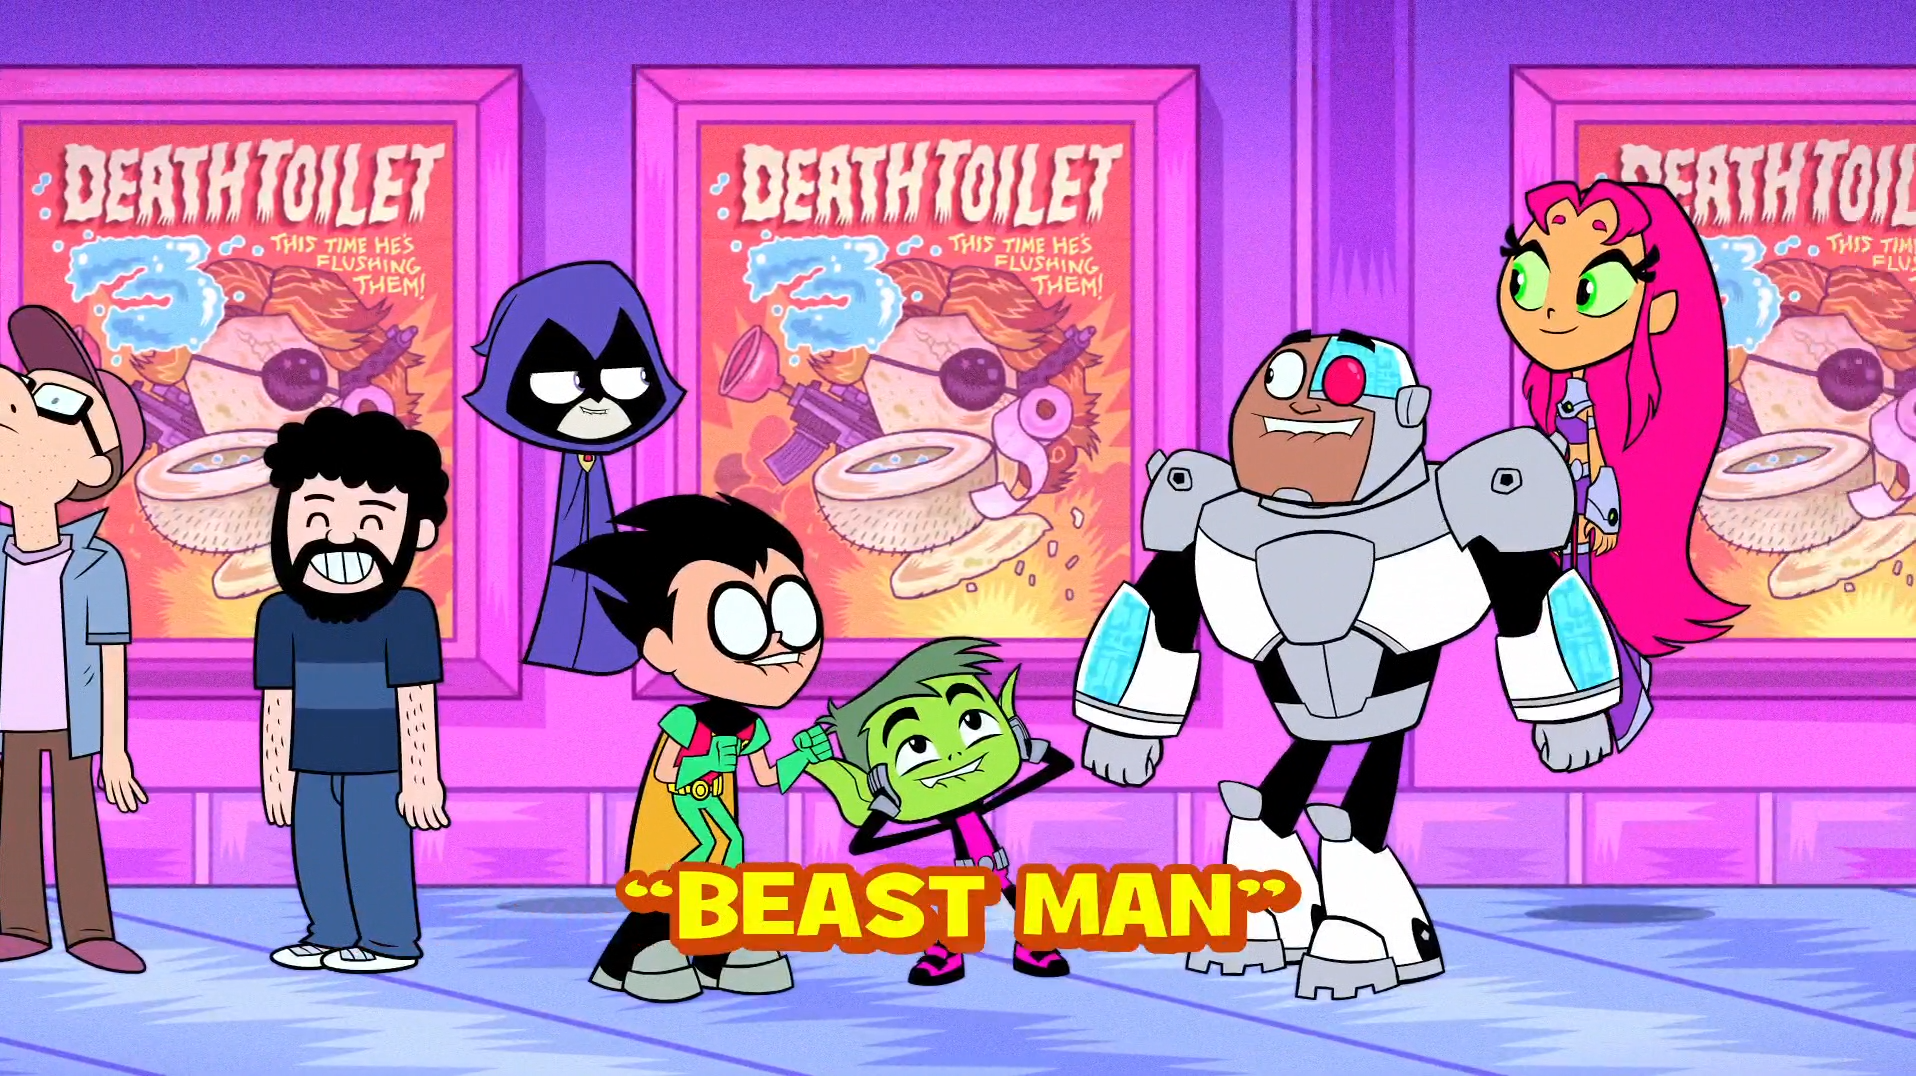 https://static.wikia.nocookie.net/teen-titans-go/images/0/04/Beast_Man_titlecard.png/revision/latest?cb=20150403145012